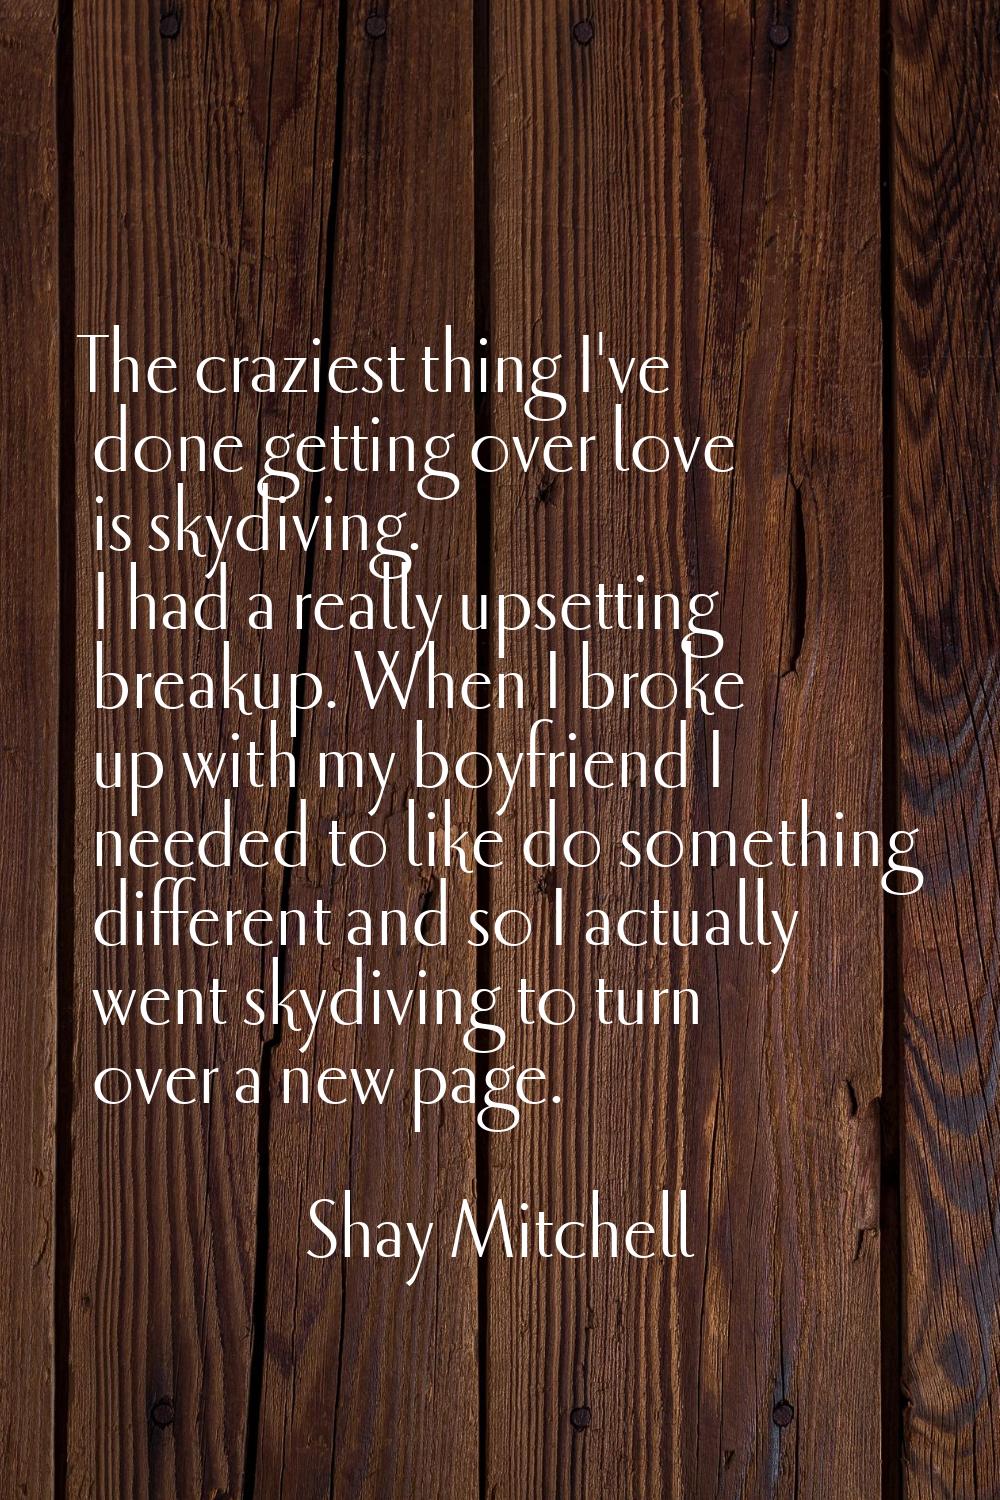 The craziest thing I've done getting over love is skydiving. I had a really upsetting breakup. When